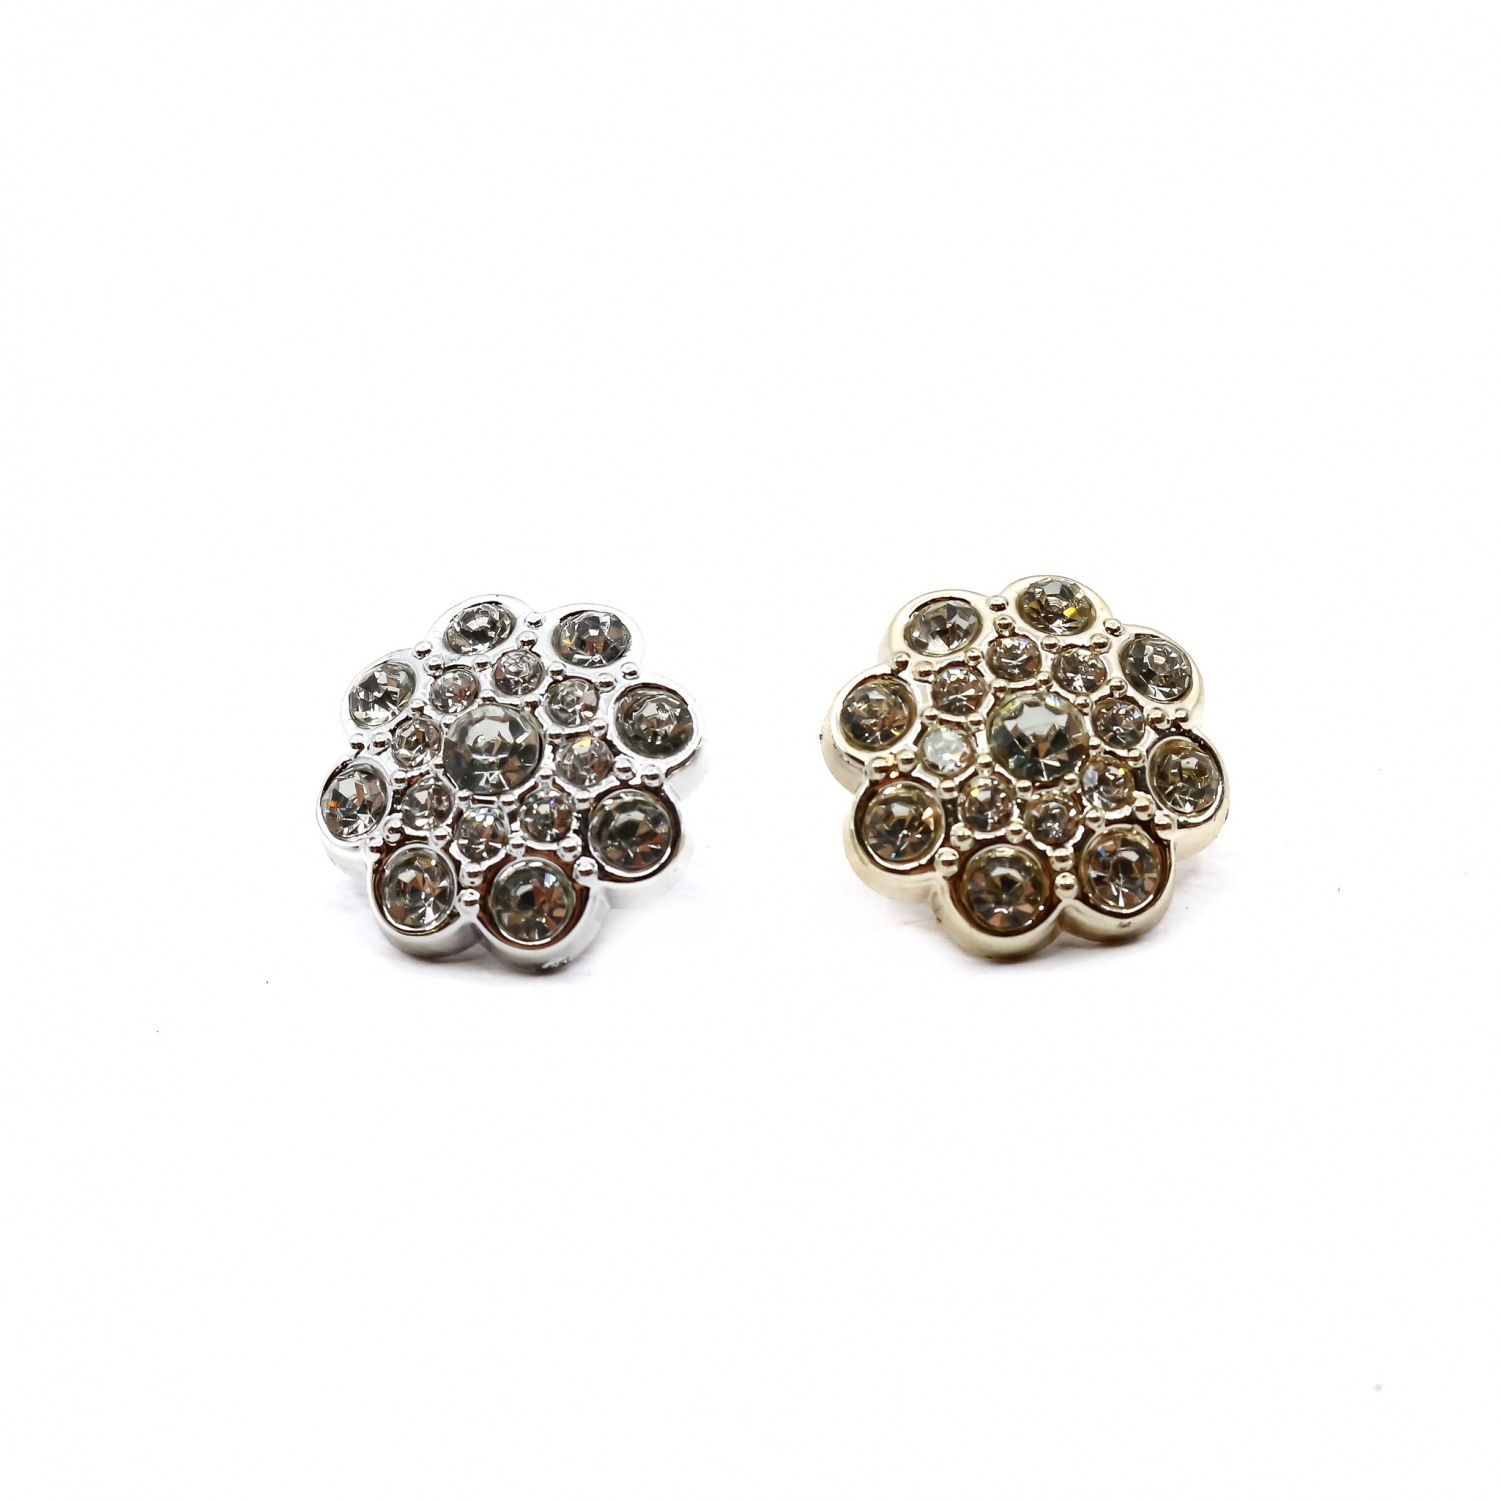 Shank Buttons with Rhinestones, 21 mm (100 pcs/pack) Code: 840/34